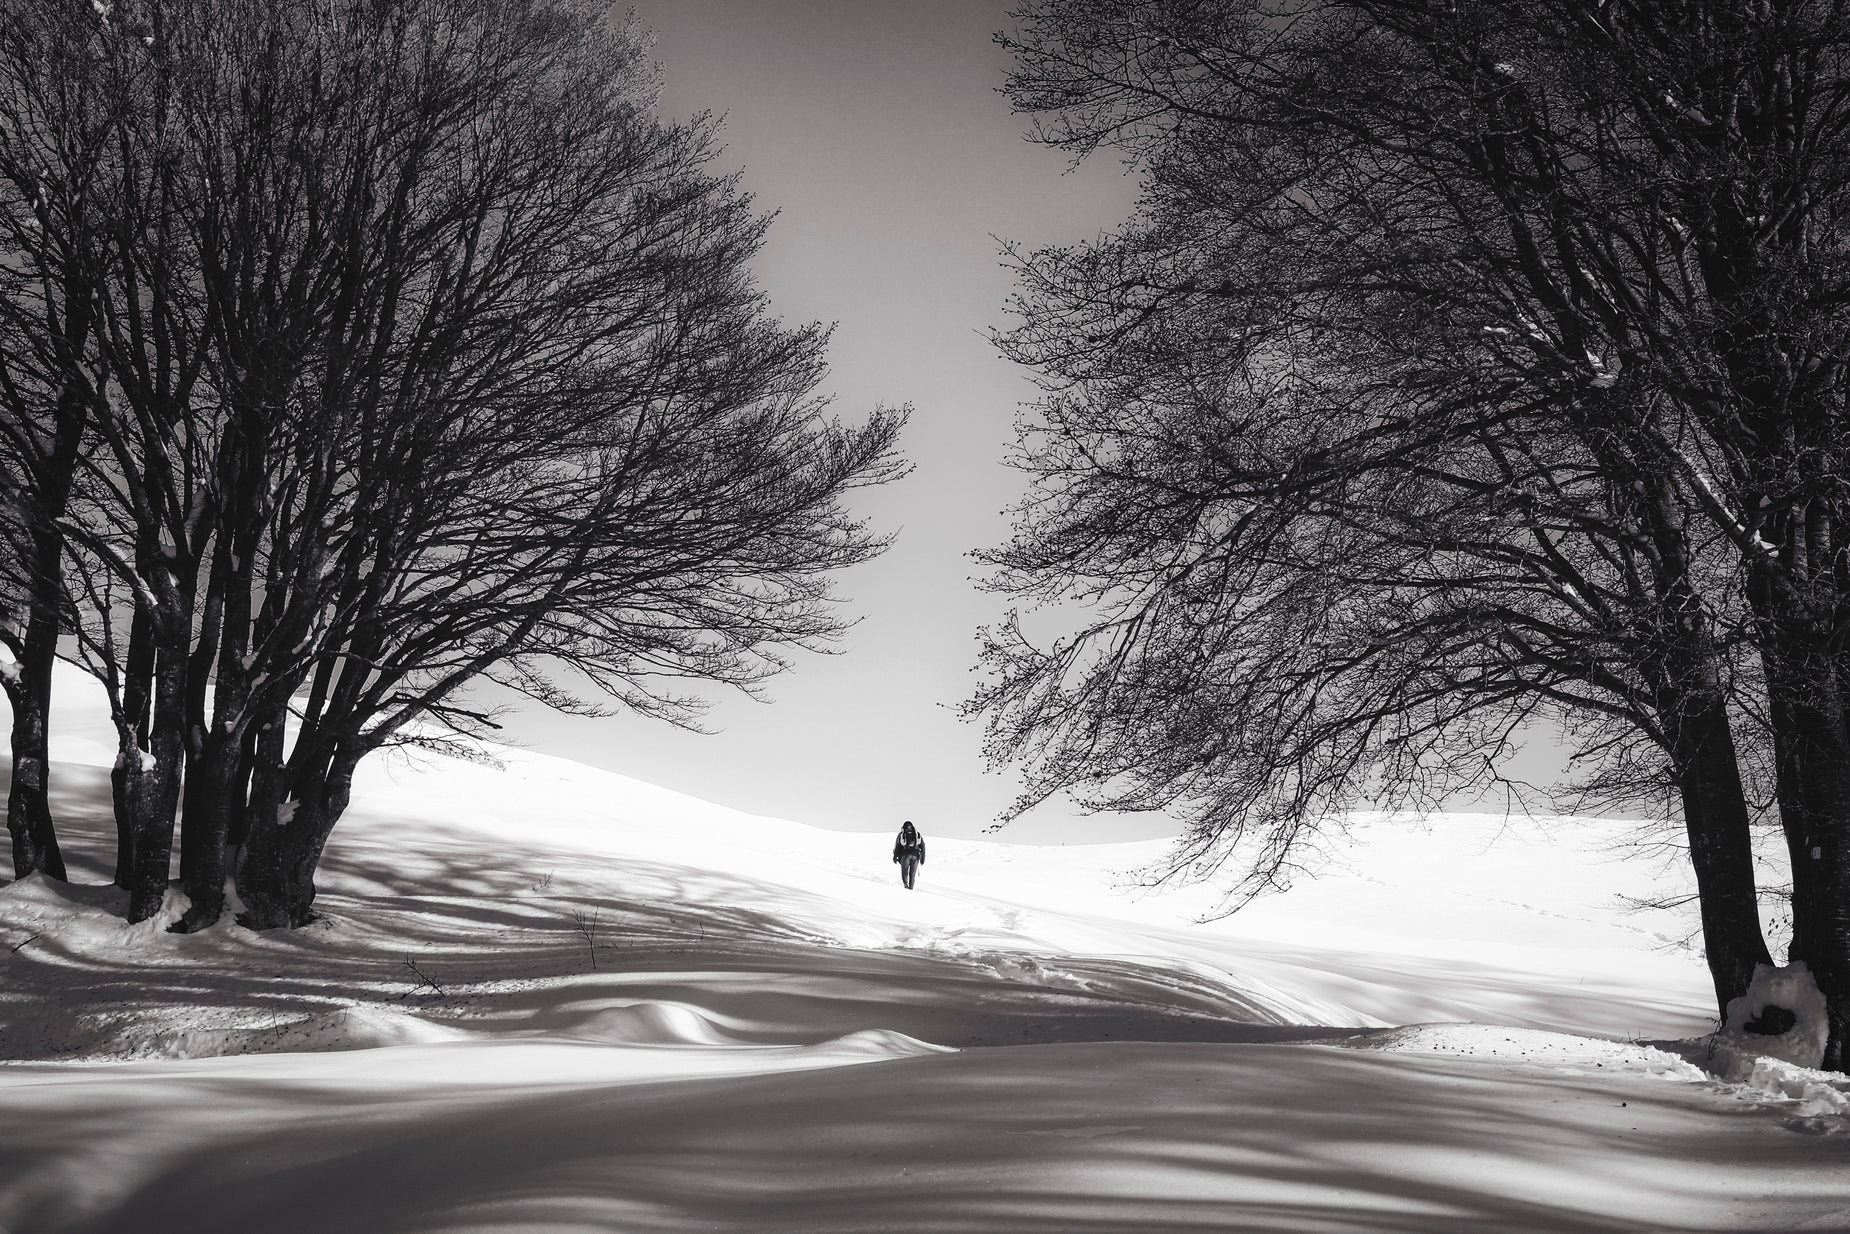 a person walks through the snowy woods in front of some trees